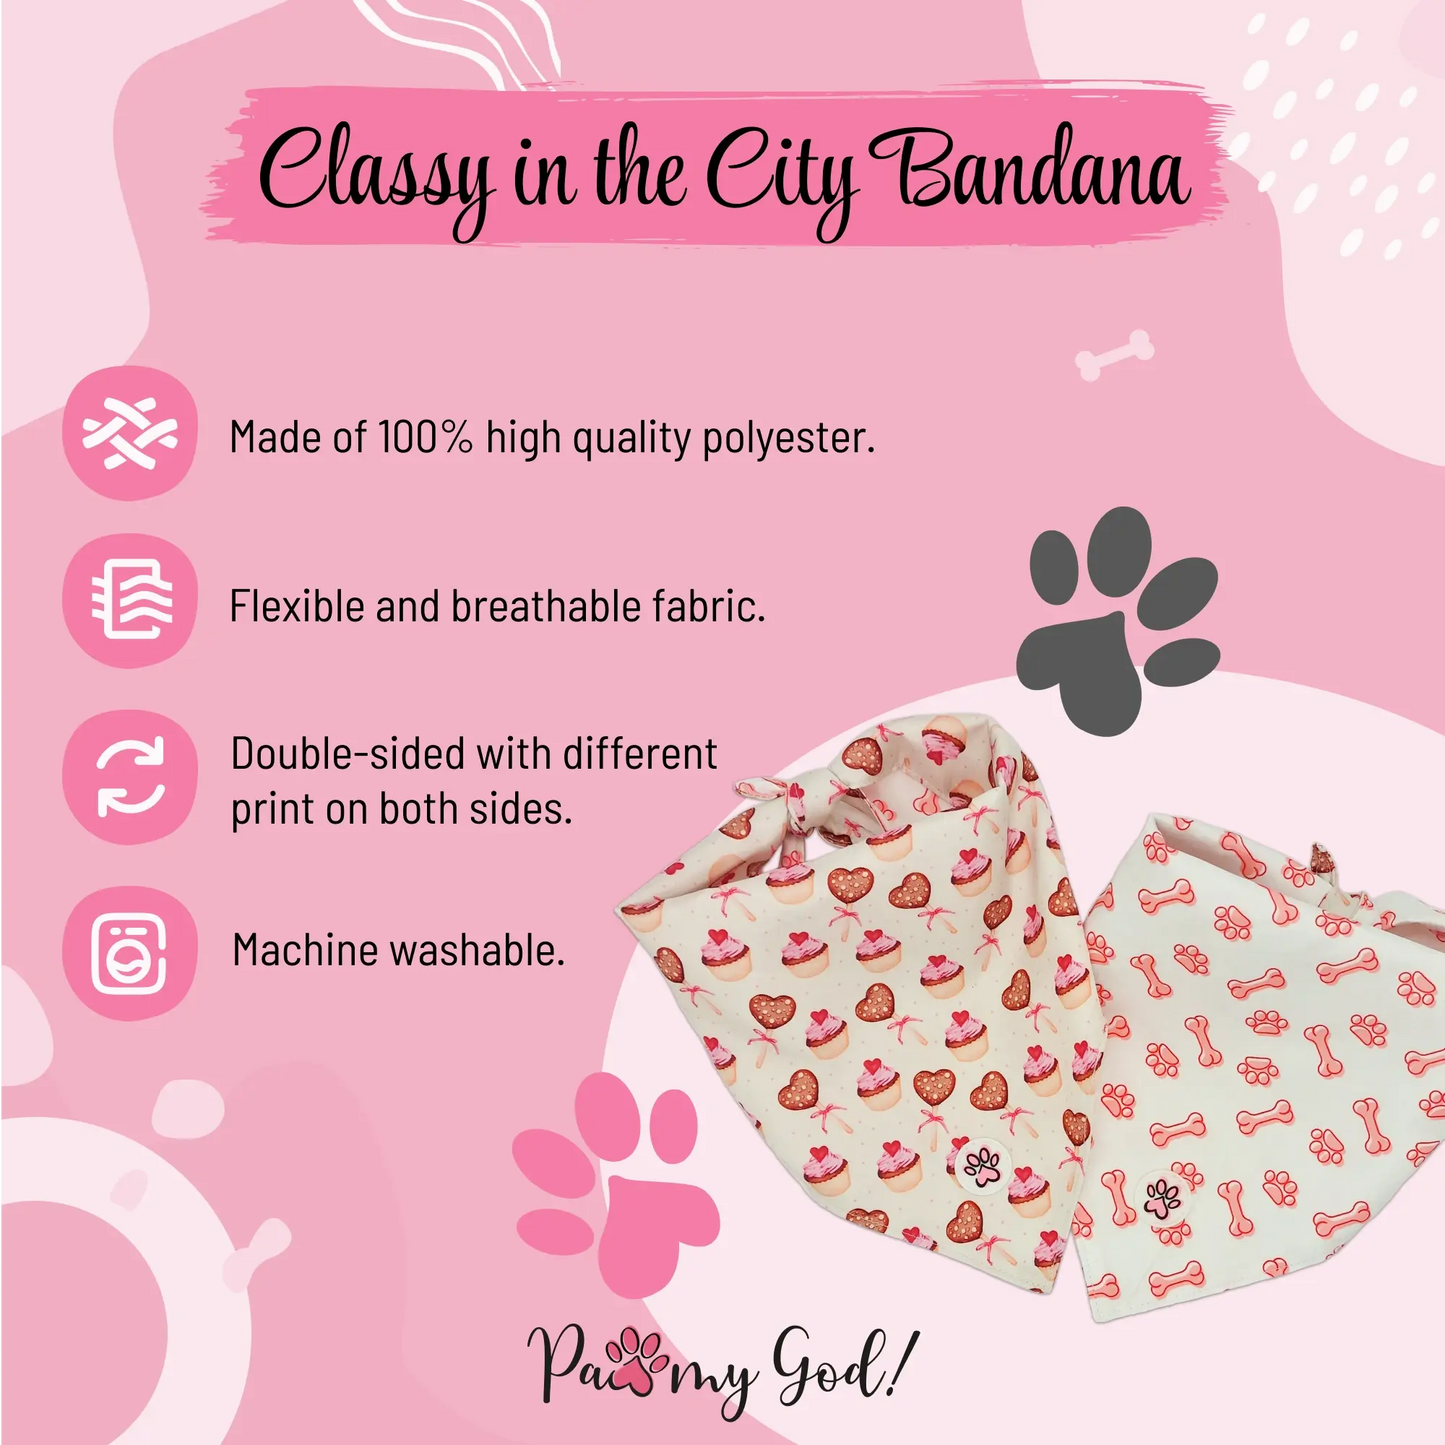 Classy in the City Bandana Features